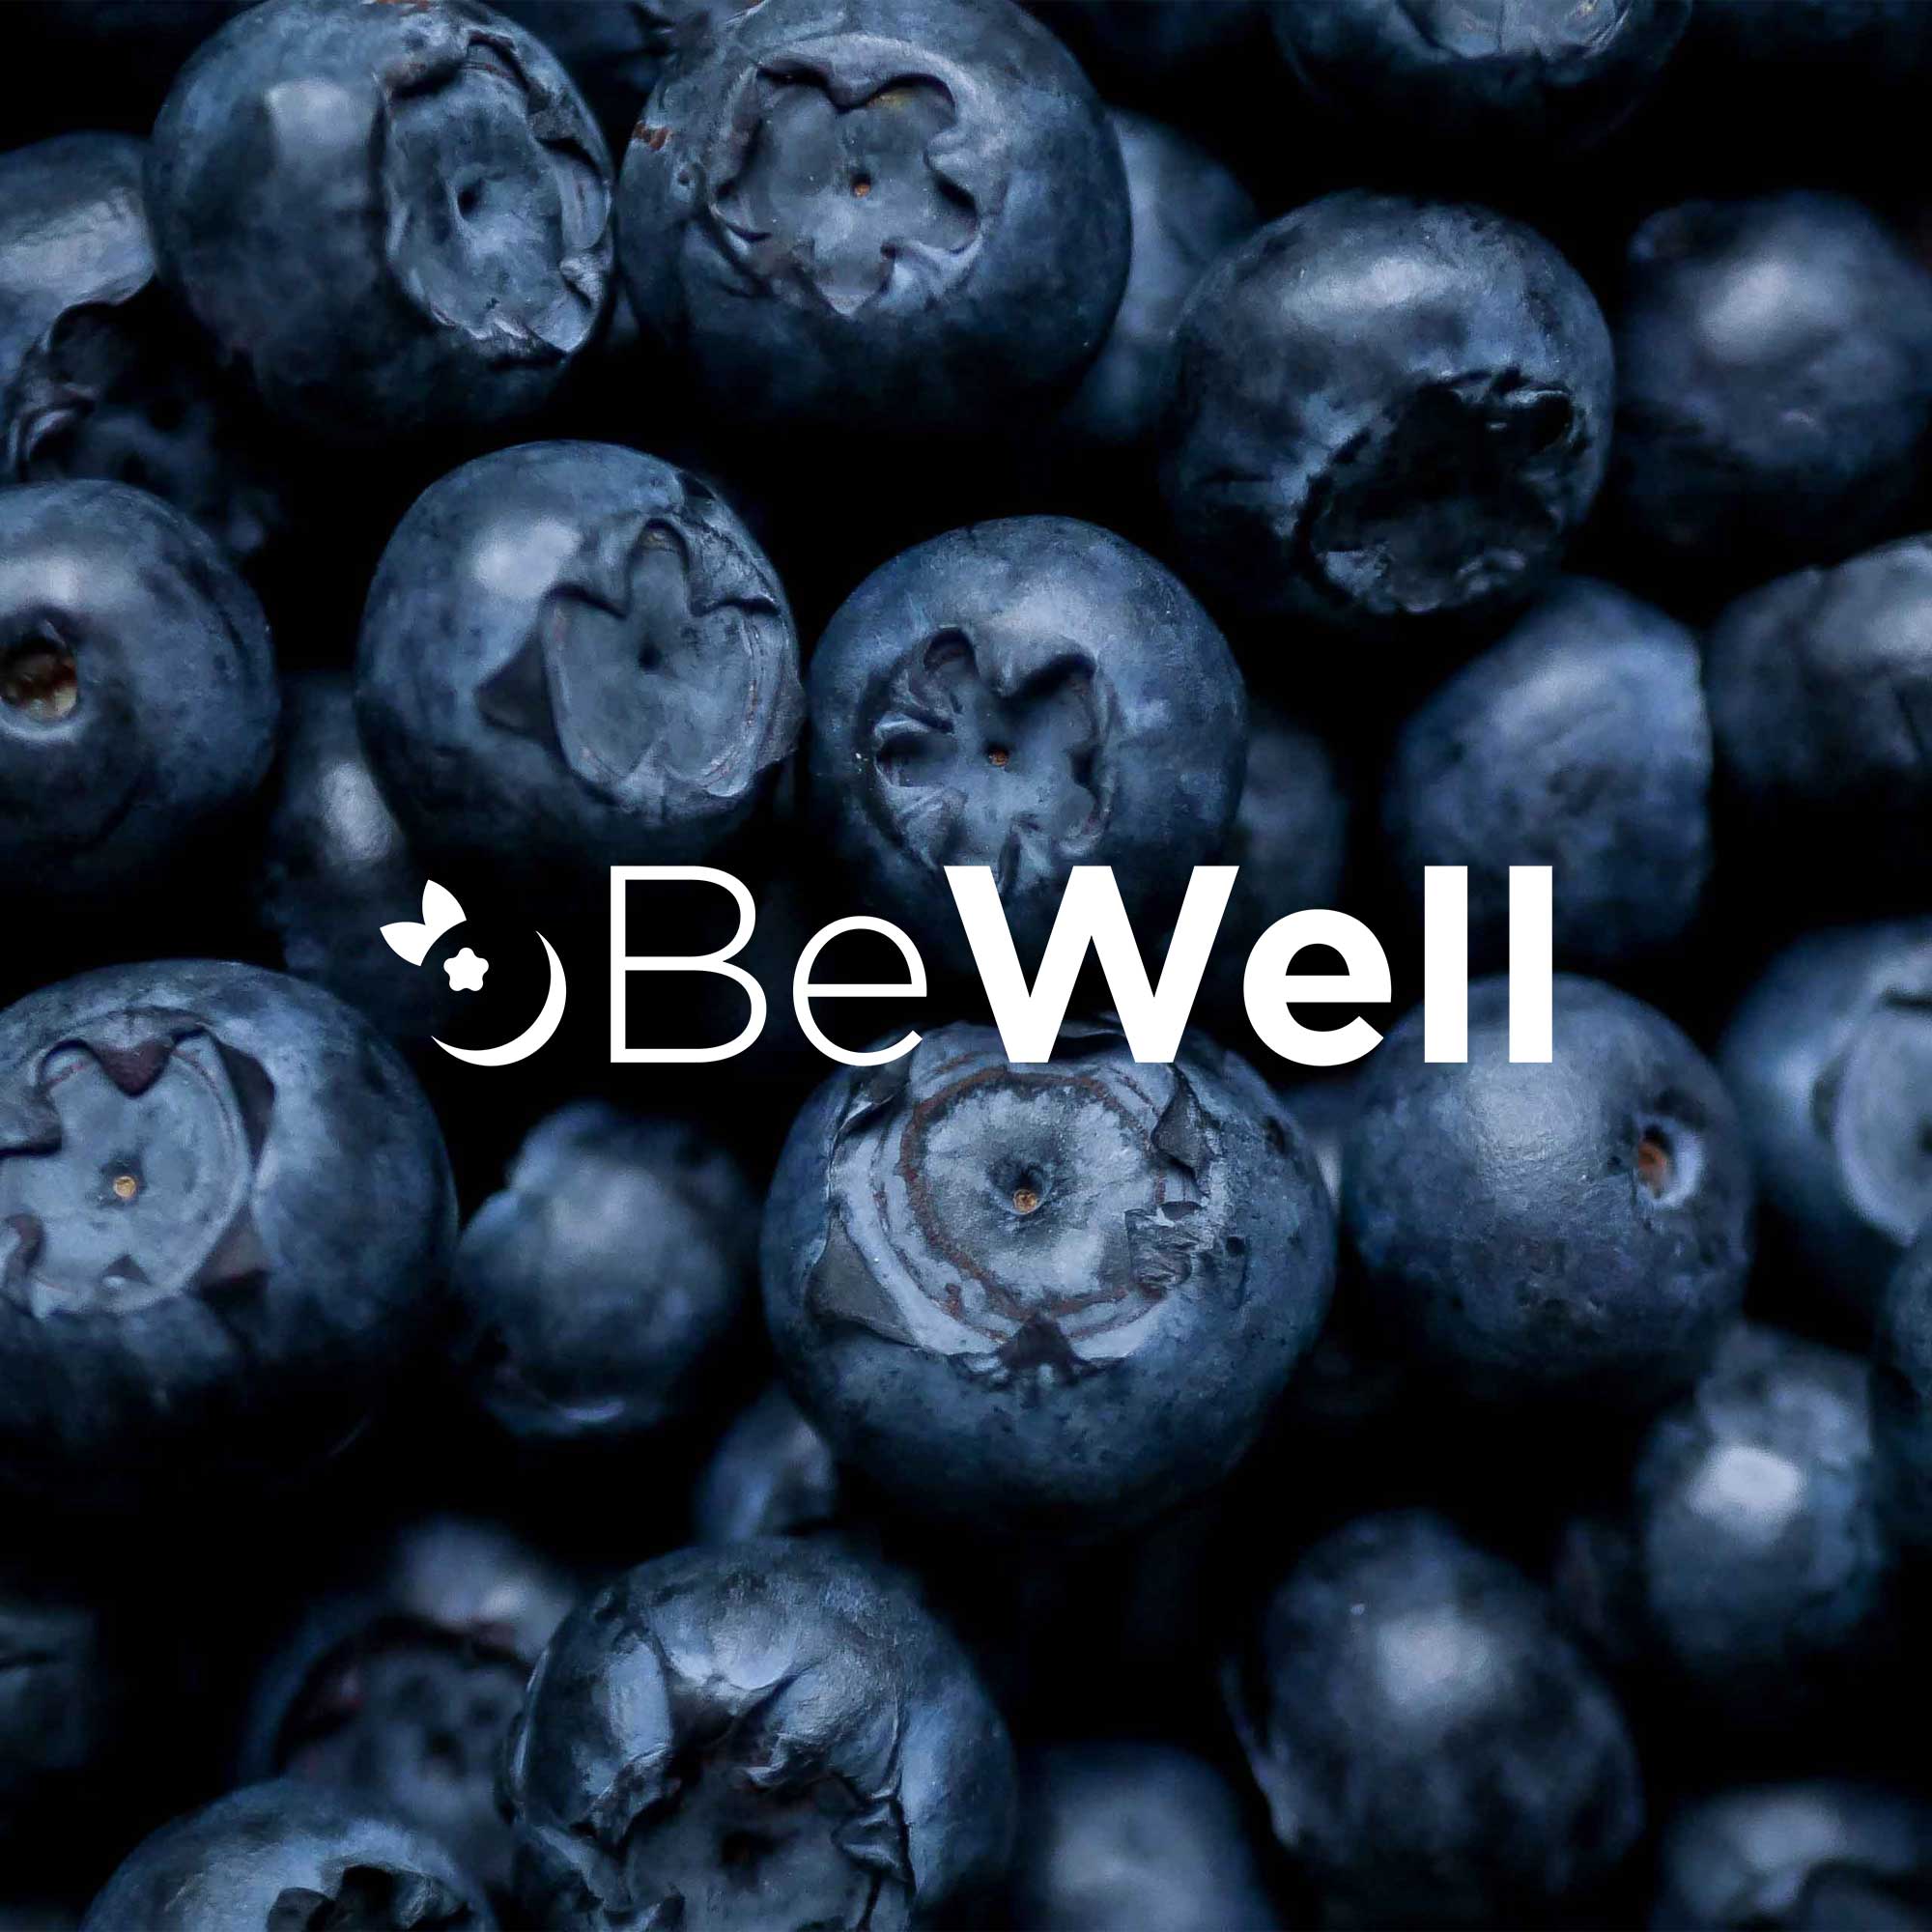 BeWell Logo over blueberries